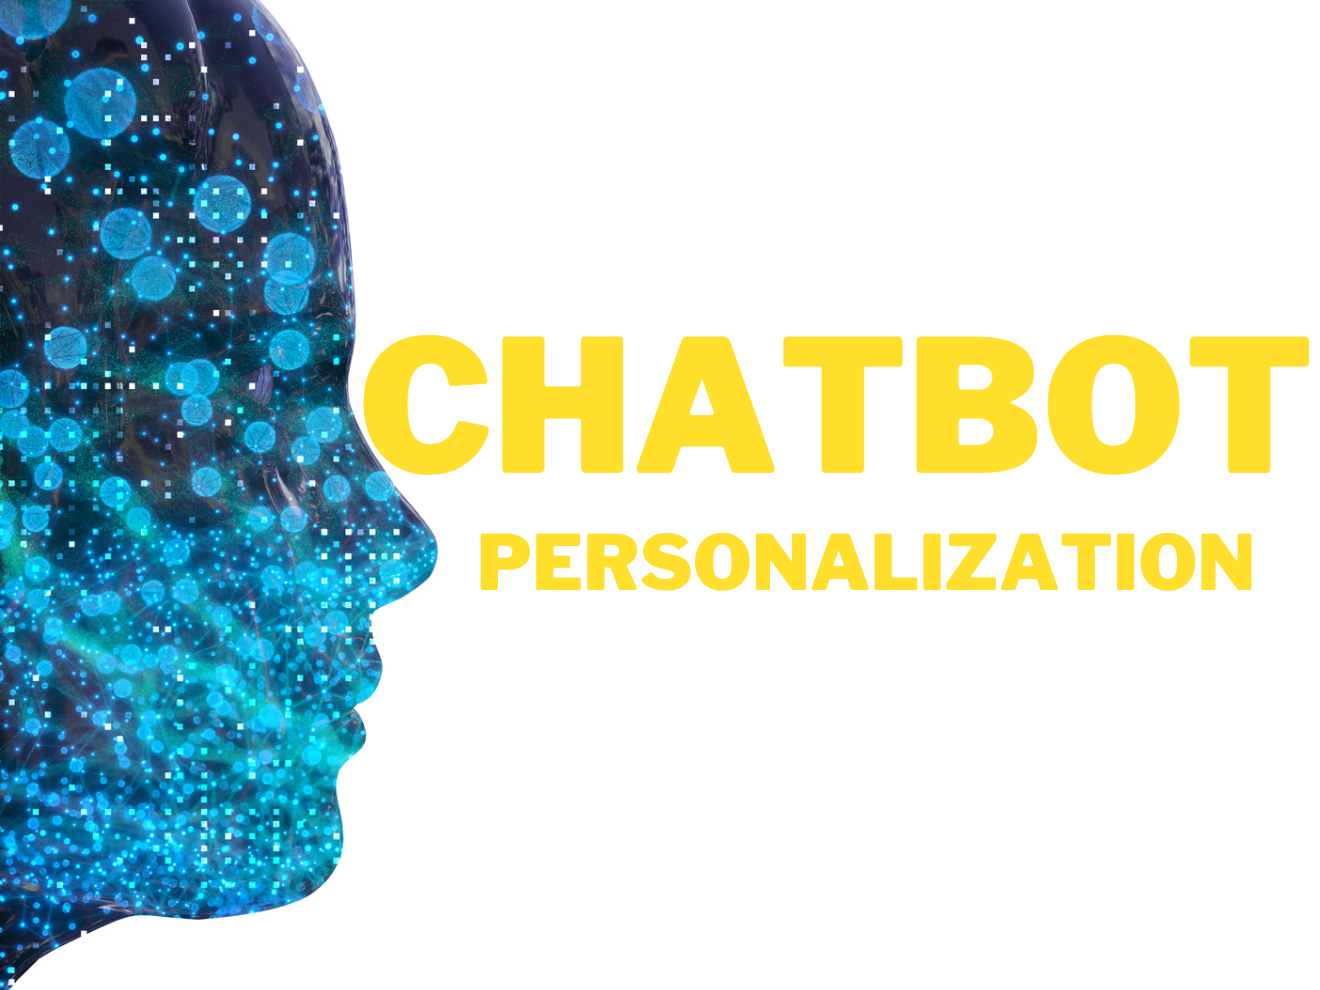 Chatbot and Personalization: Customizing Your Chatbot for Great Customer Service